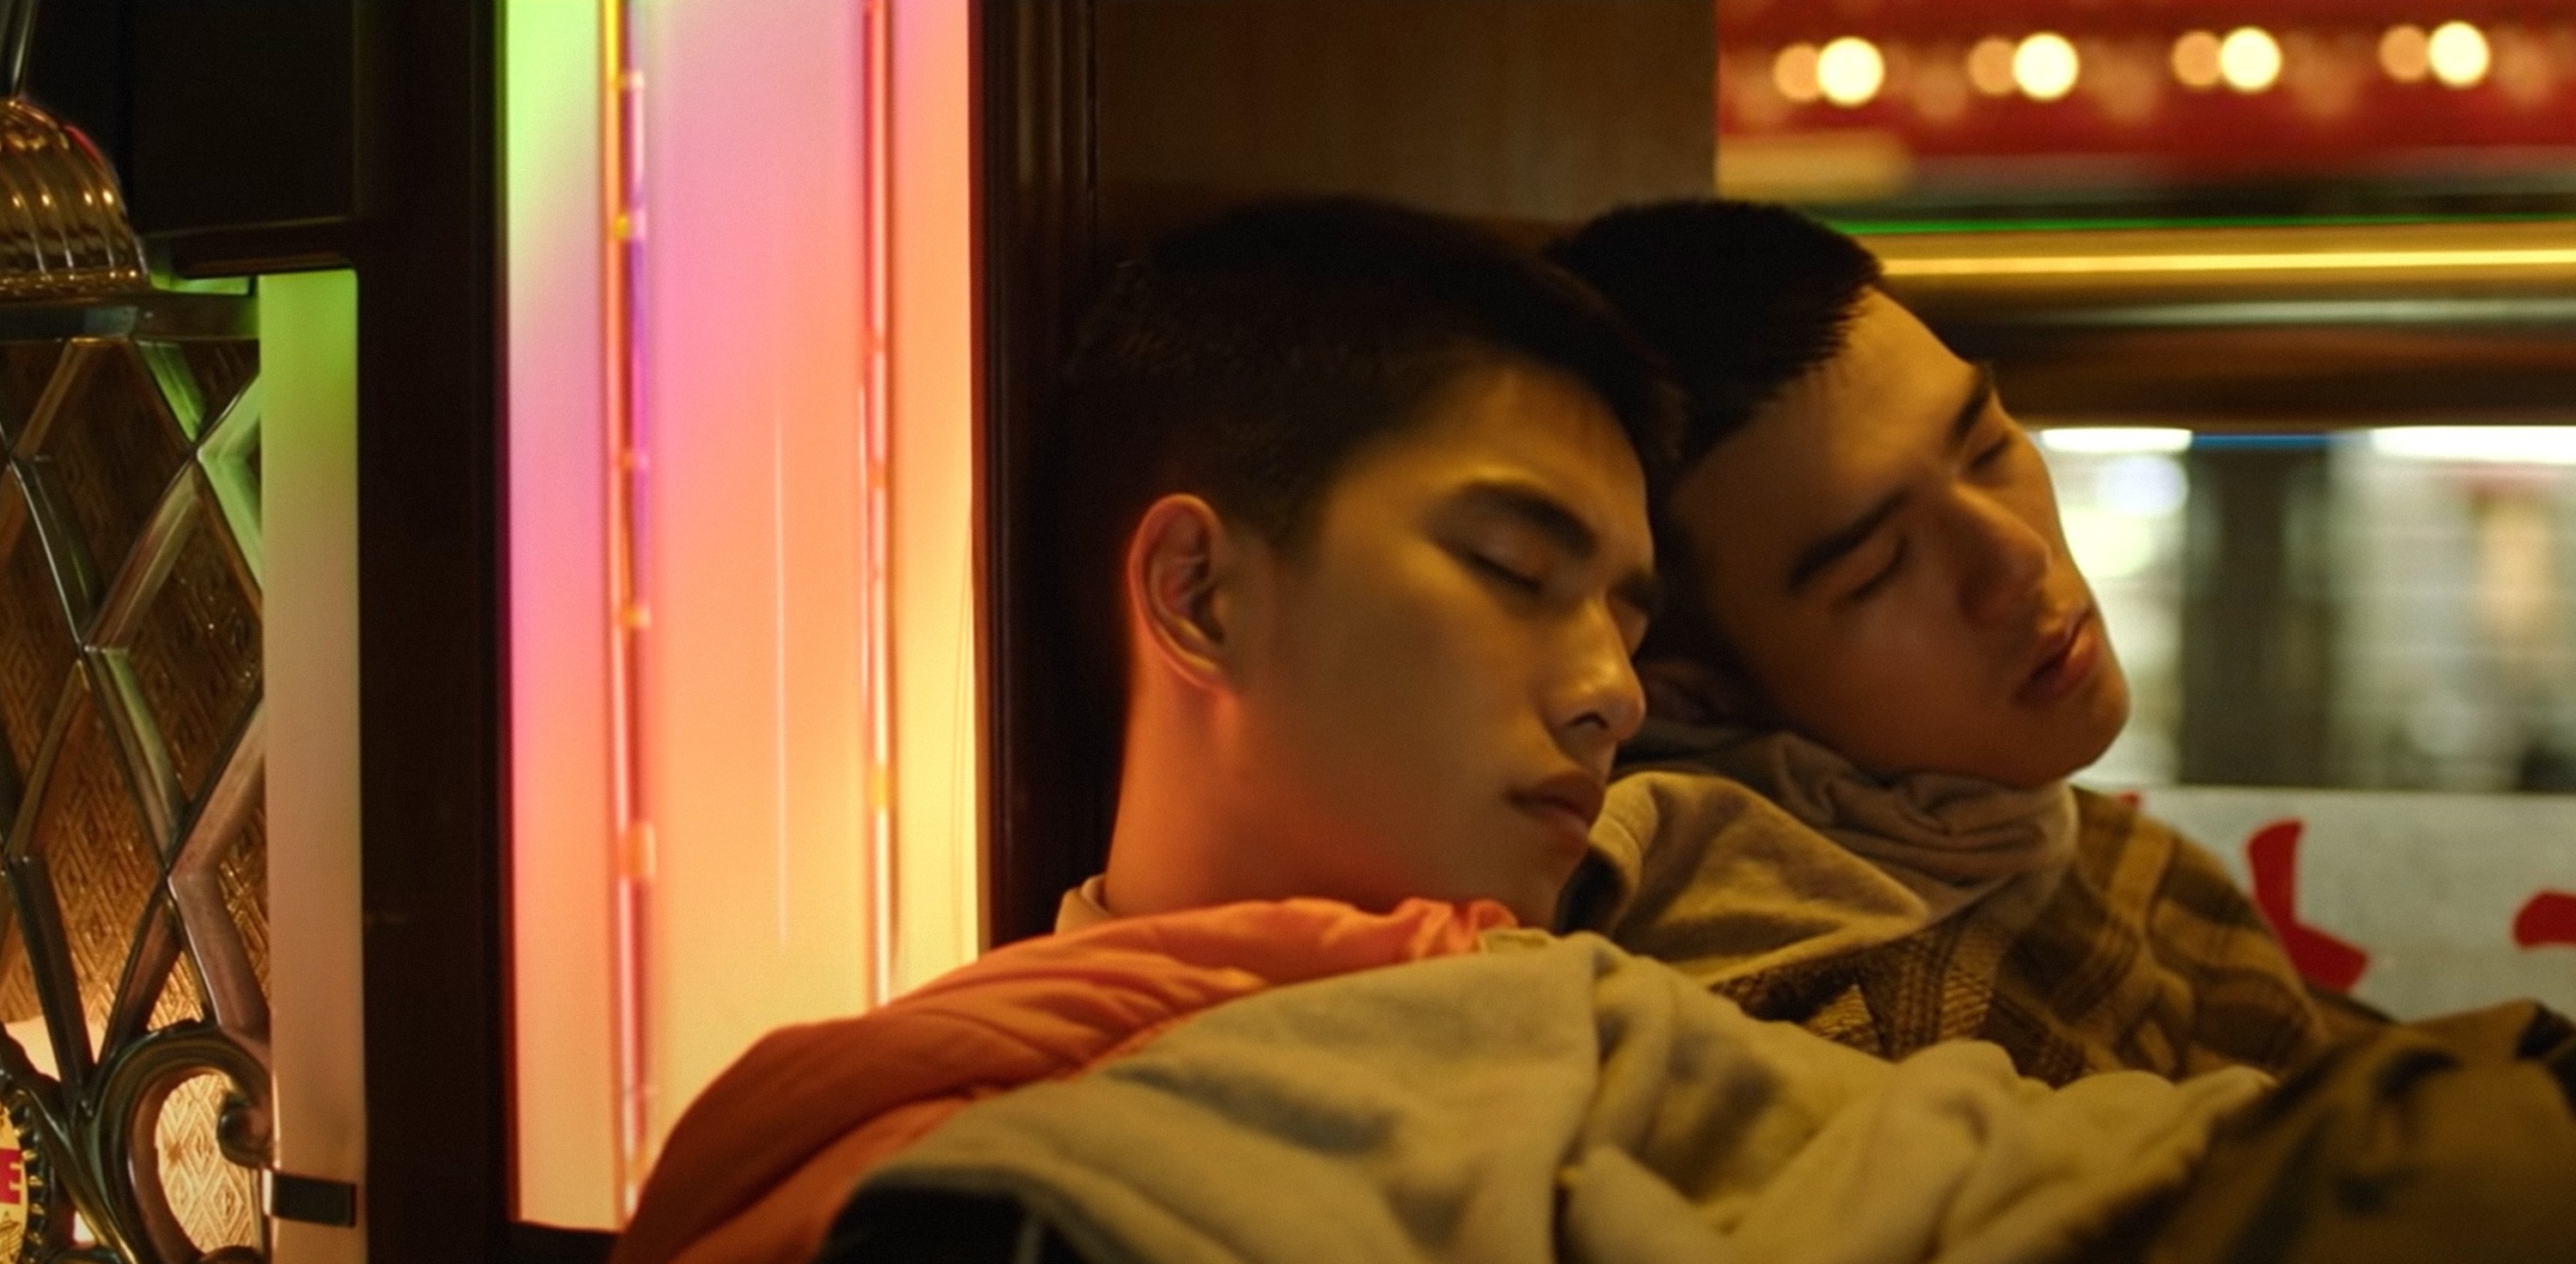 Two boys with their heads together sleeping